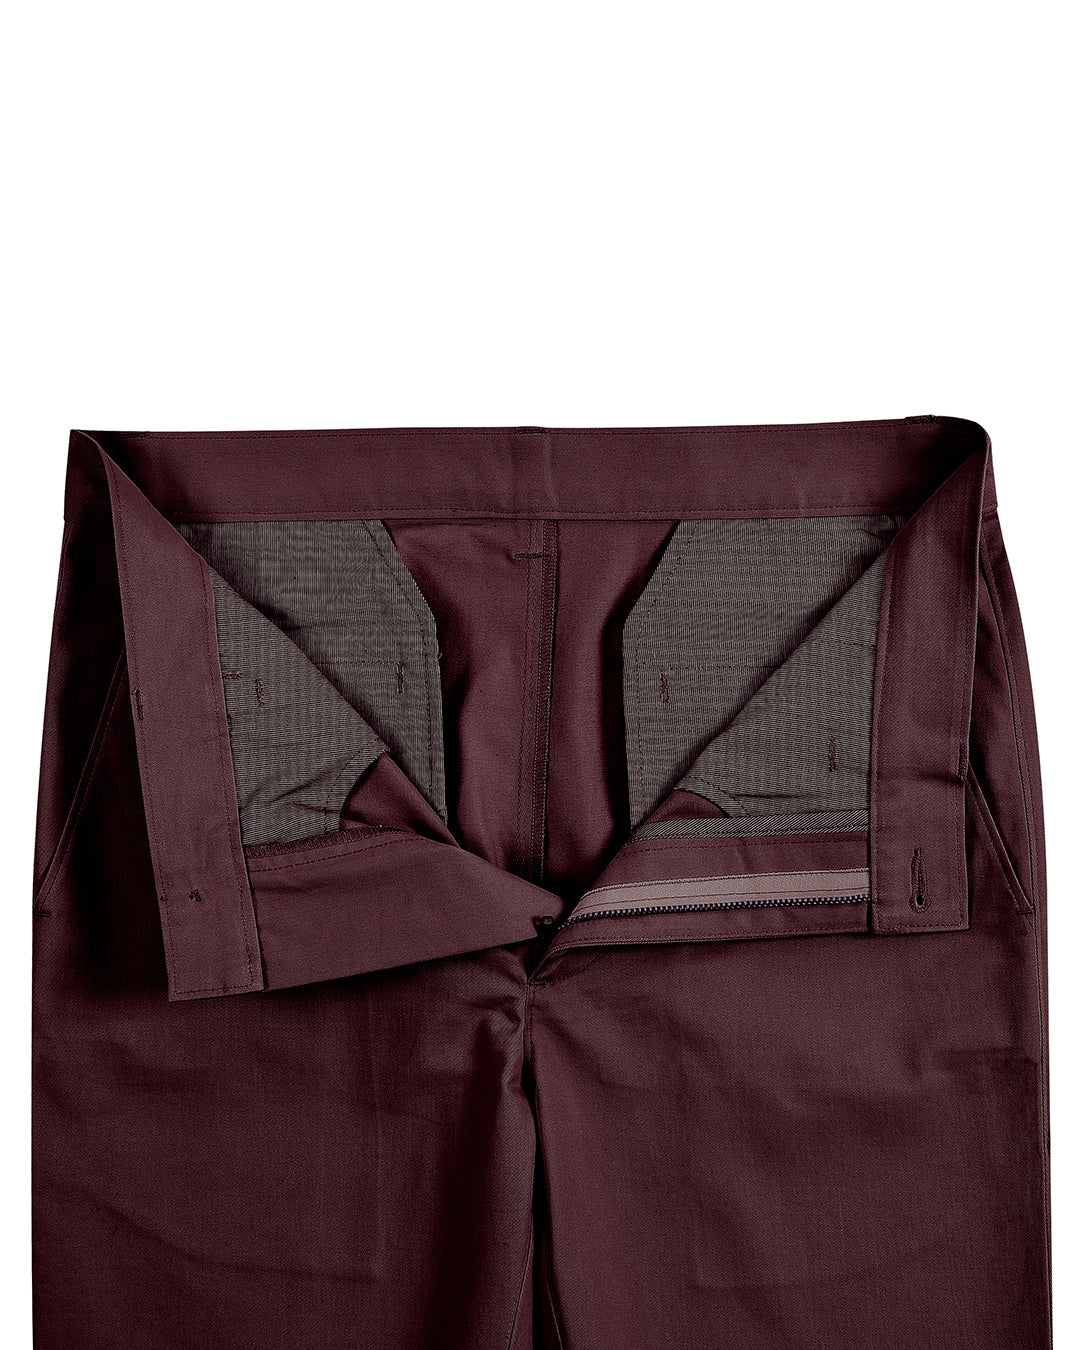 Open front view of custom Genoa Chino pants for men by Luxire in plum